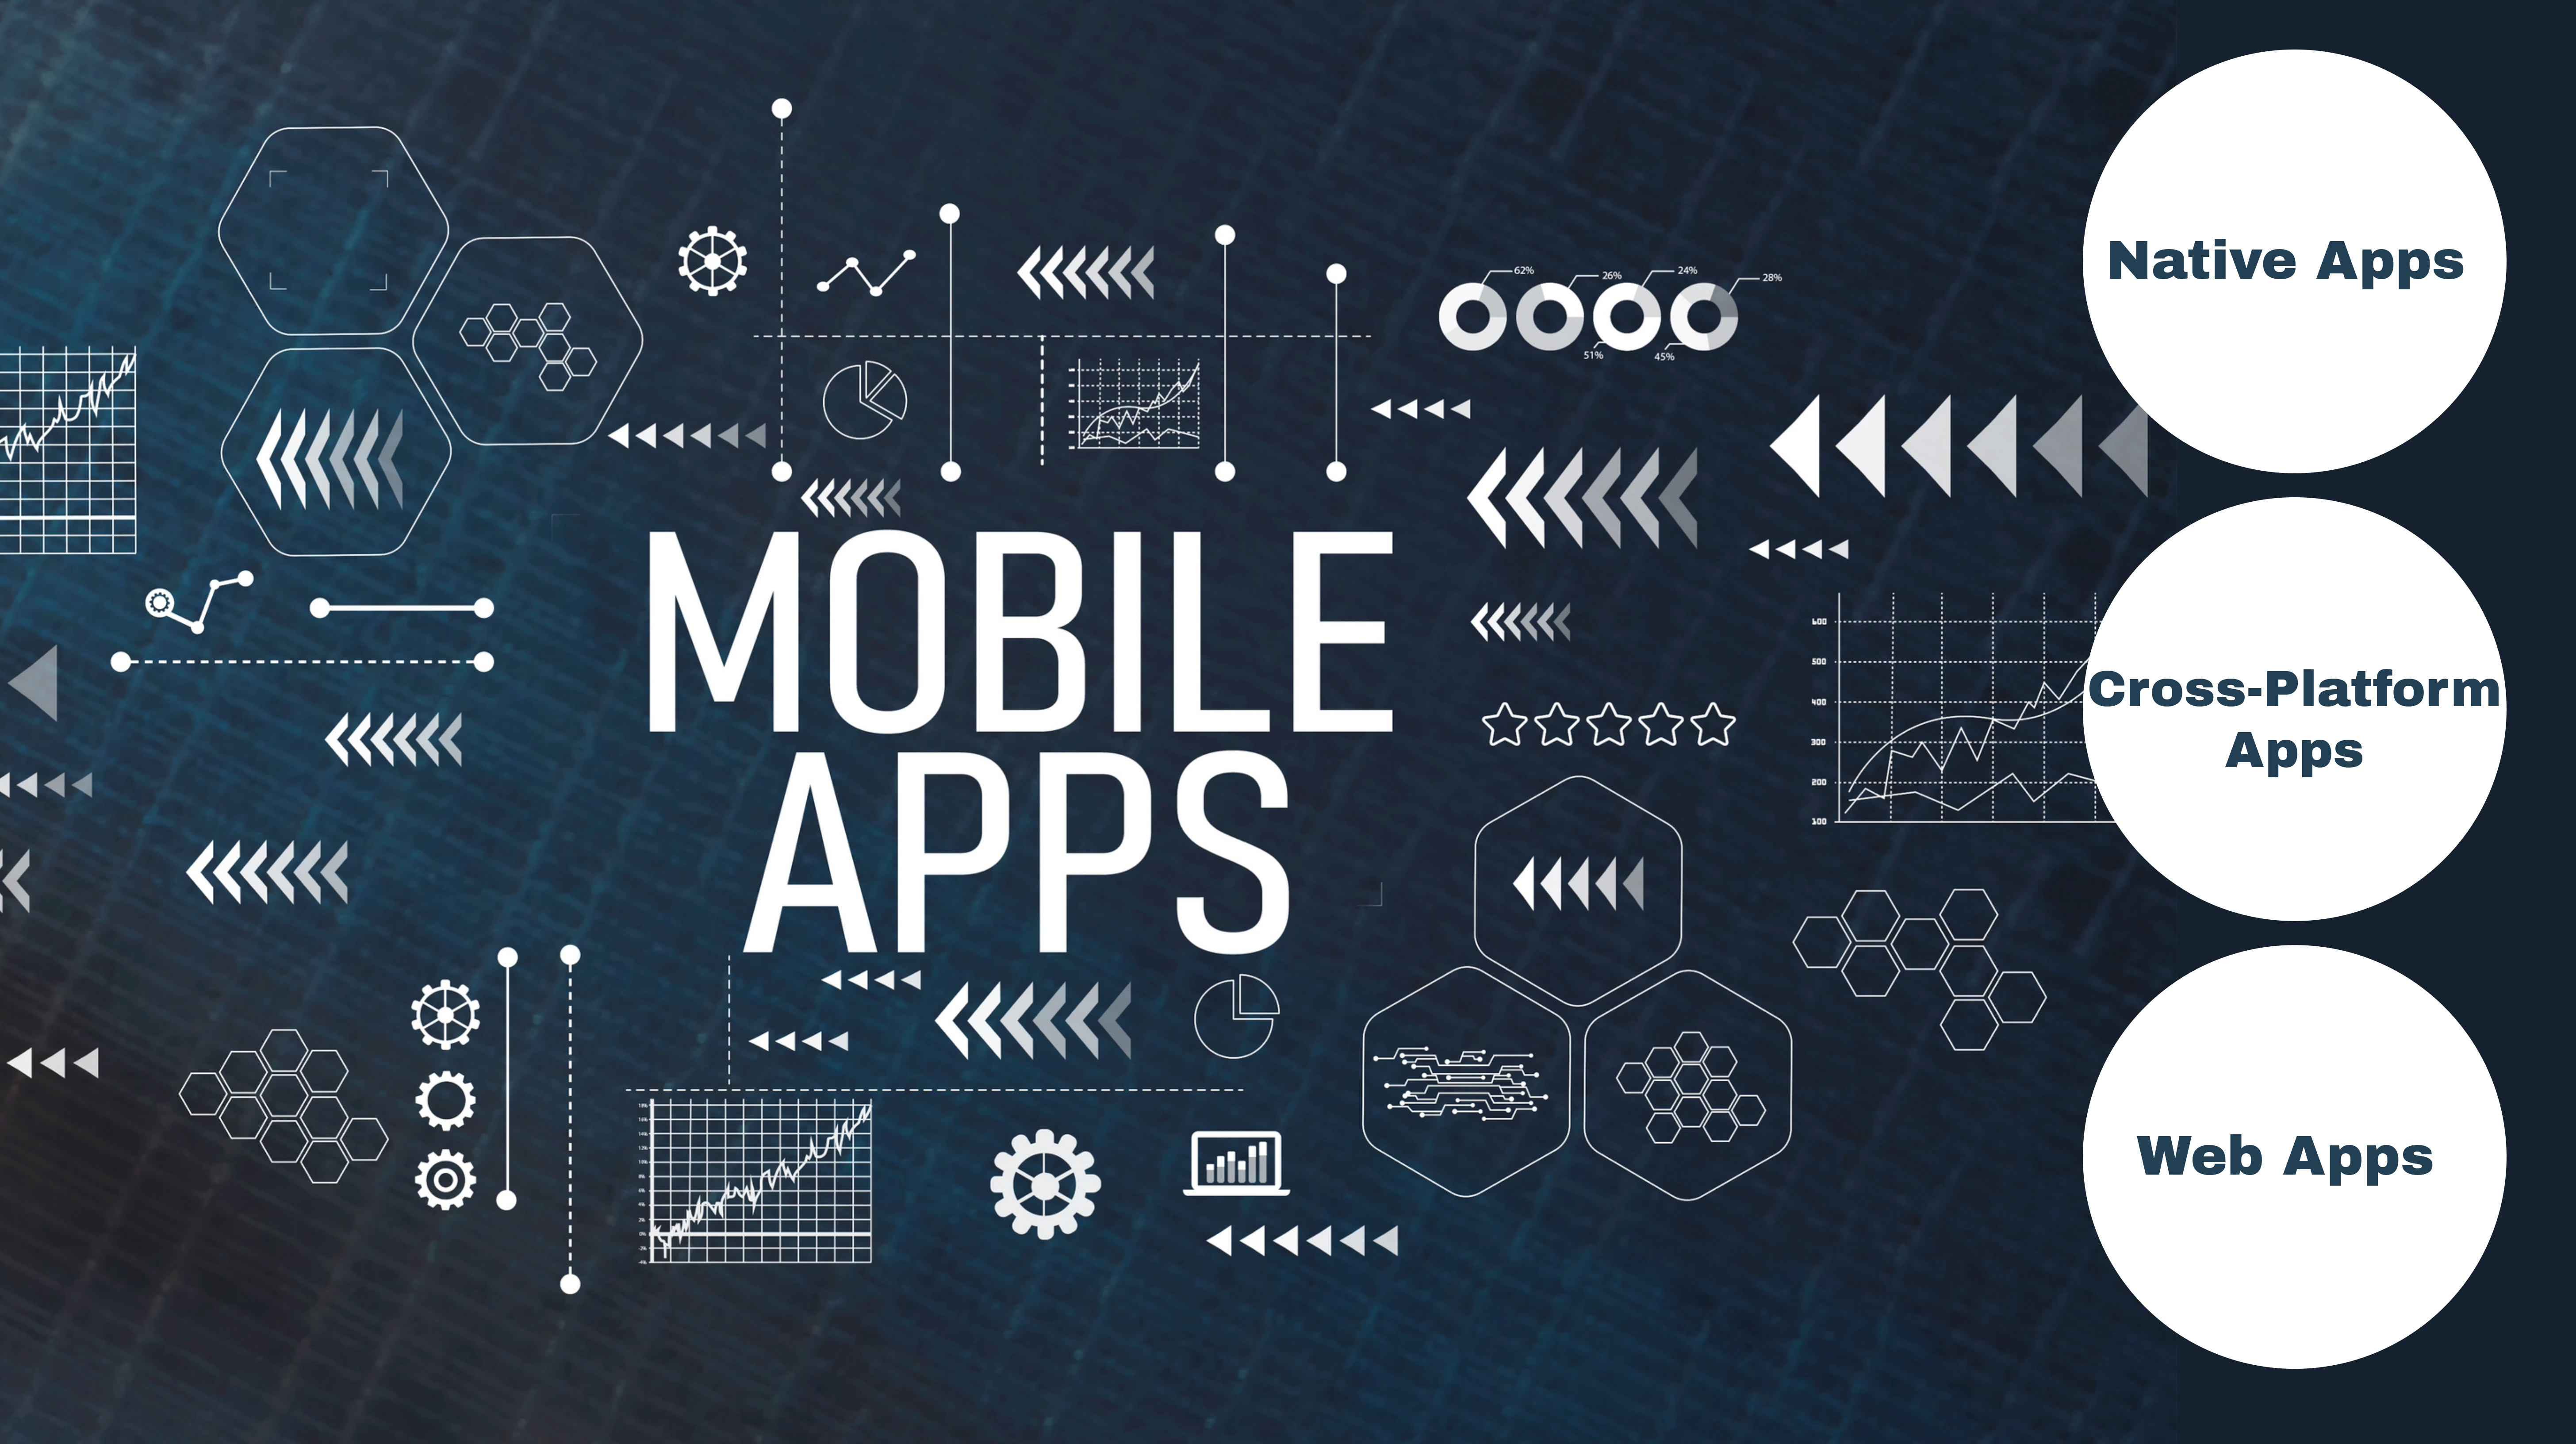 World of Mobile Applications: Choosing the Right Path